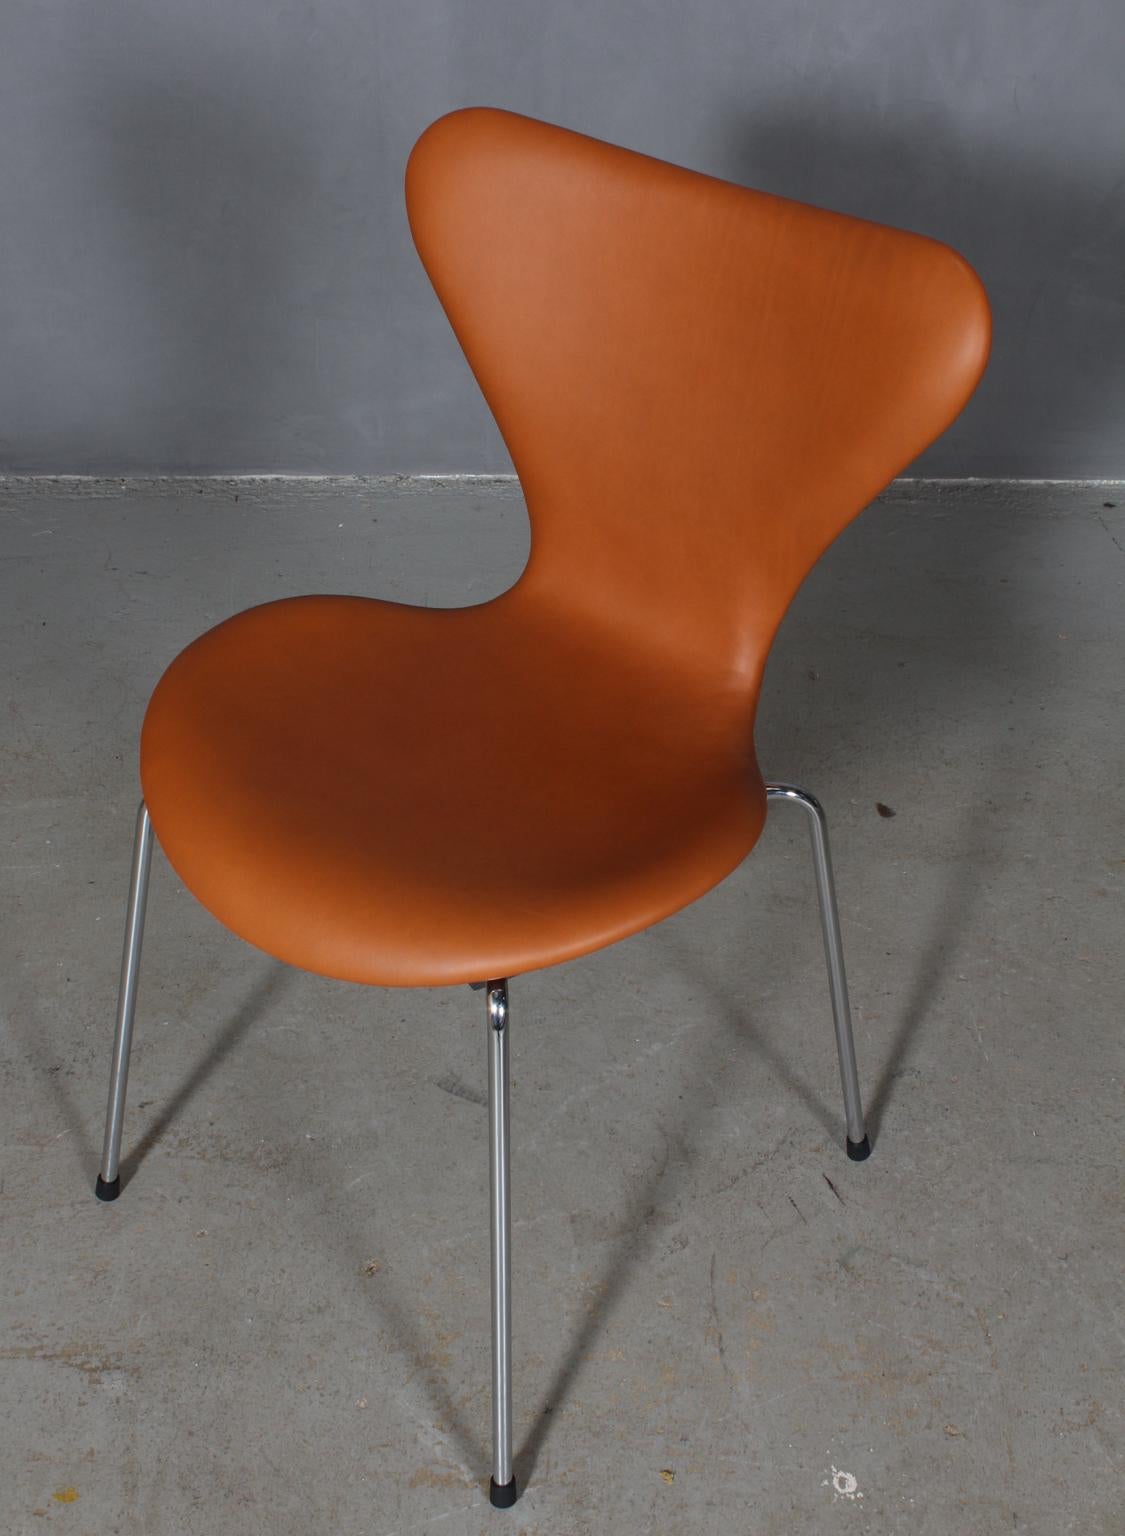 Arne Jacobsen dining chair new upholstered with walnut elegance aniline leather.

Base of chrome steel tube.

Model 3107 Syveren, made by Fritz Hansen.

New shell and base reupholsterd, with certificate.